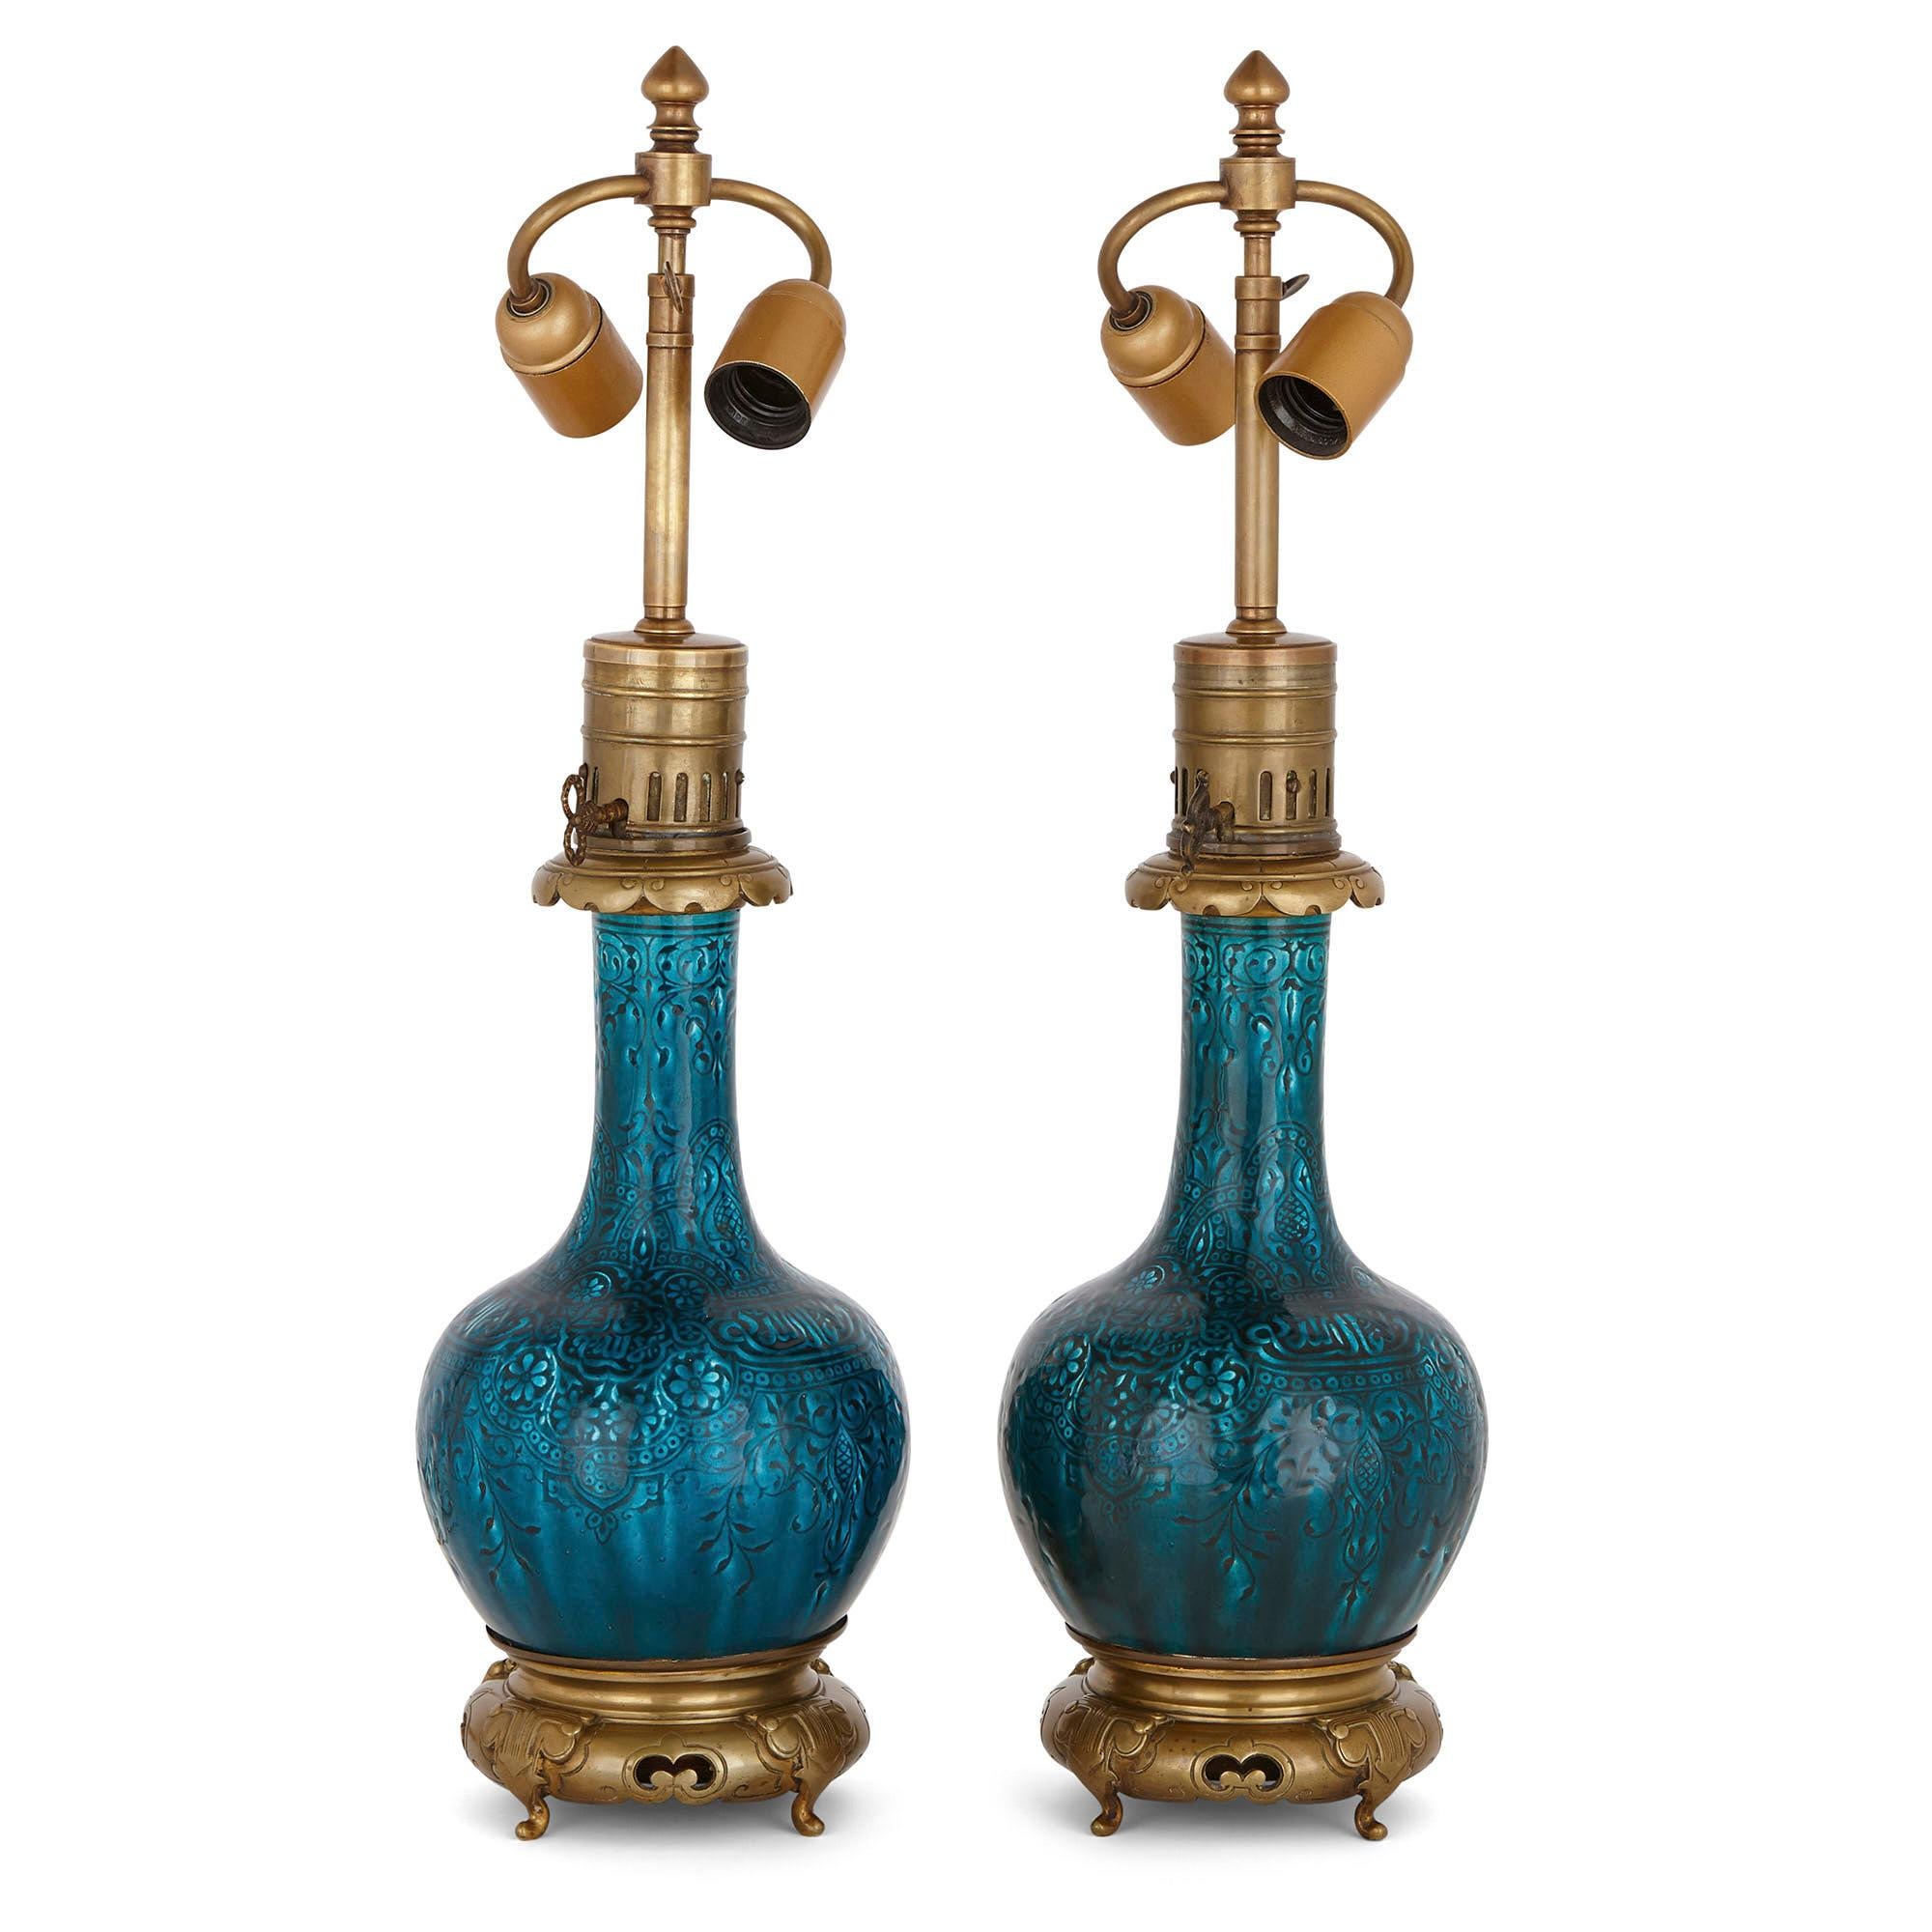 These beautiful table lamps have been attributed to Joseph-Théodore Deck, one of the most important ceramicists of the 19th century. Deck was the director of a prestigious faience workshop which was based in France. He was well known for his